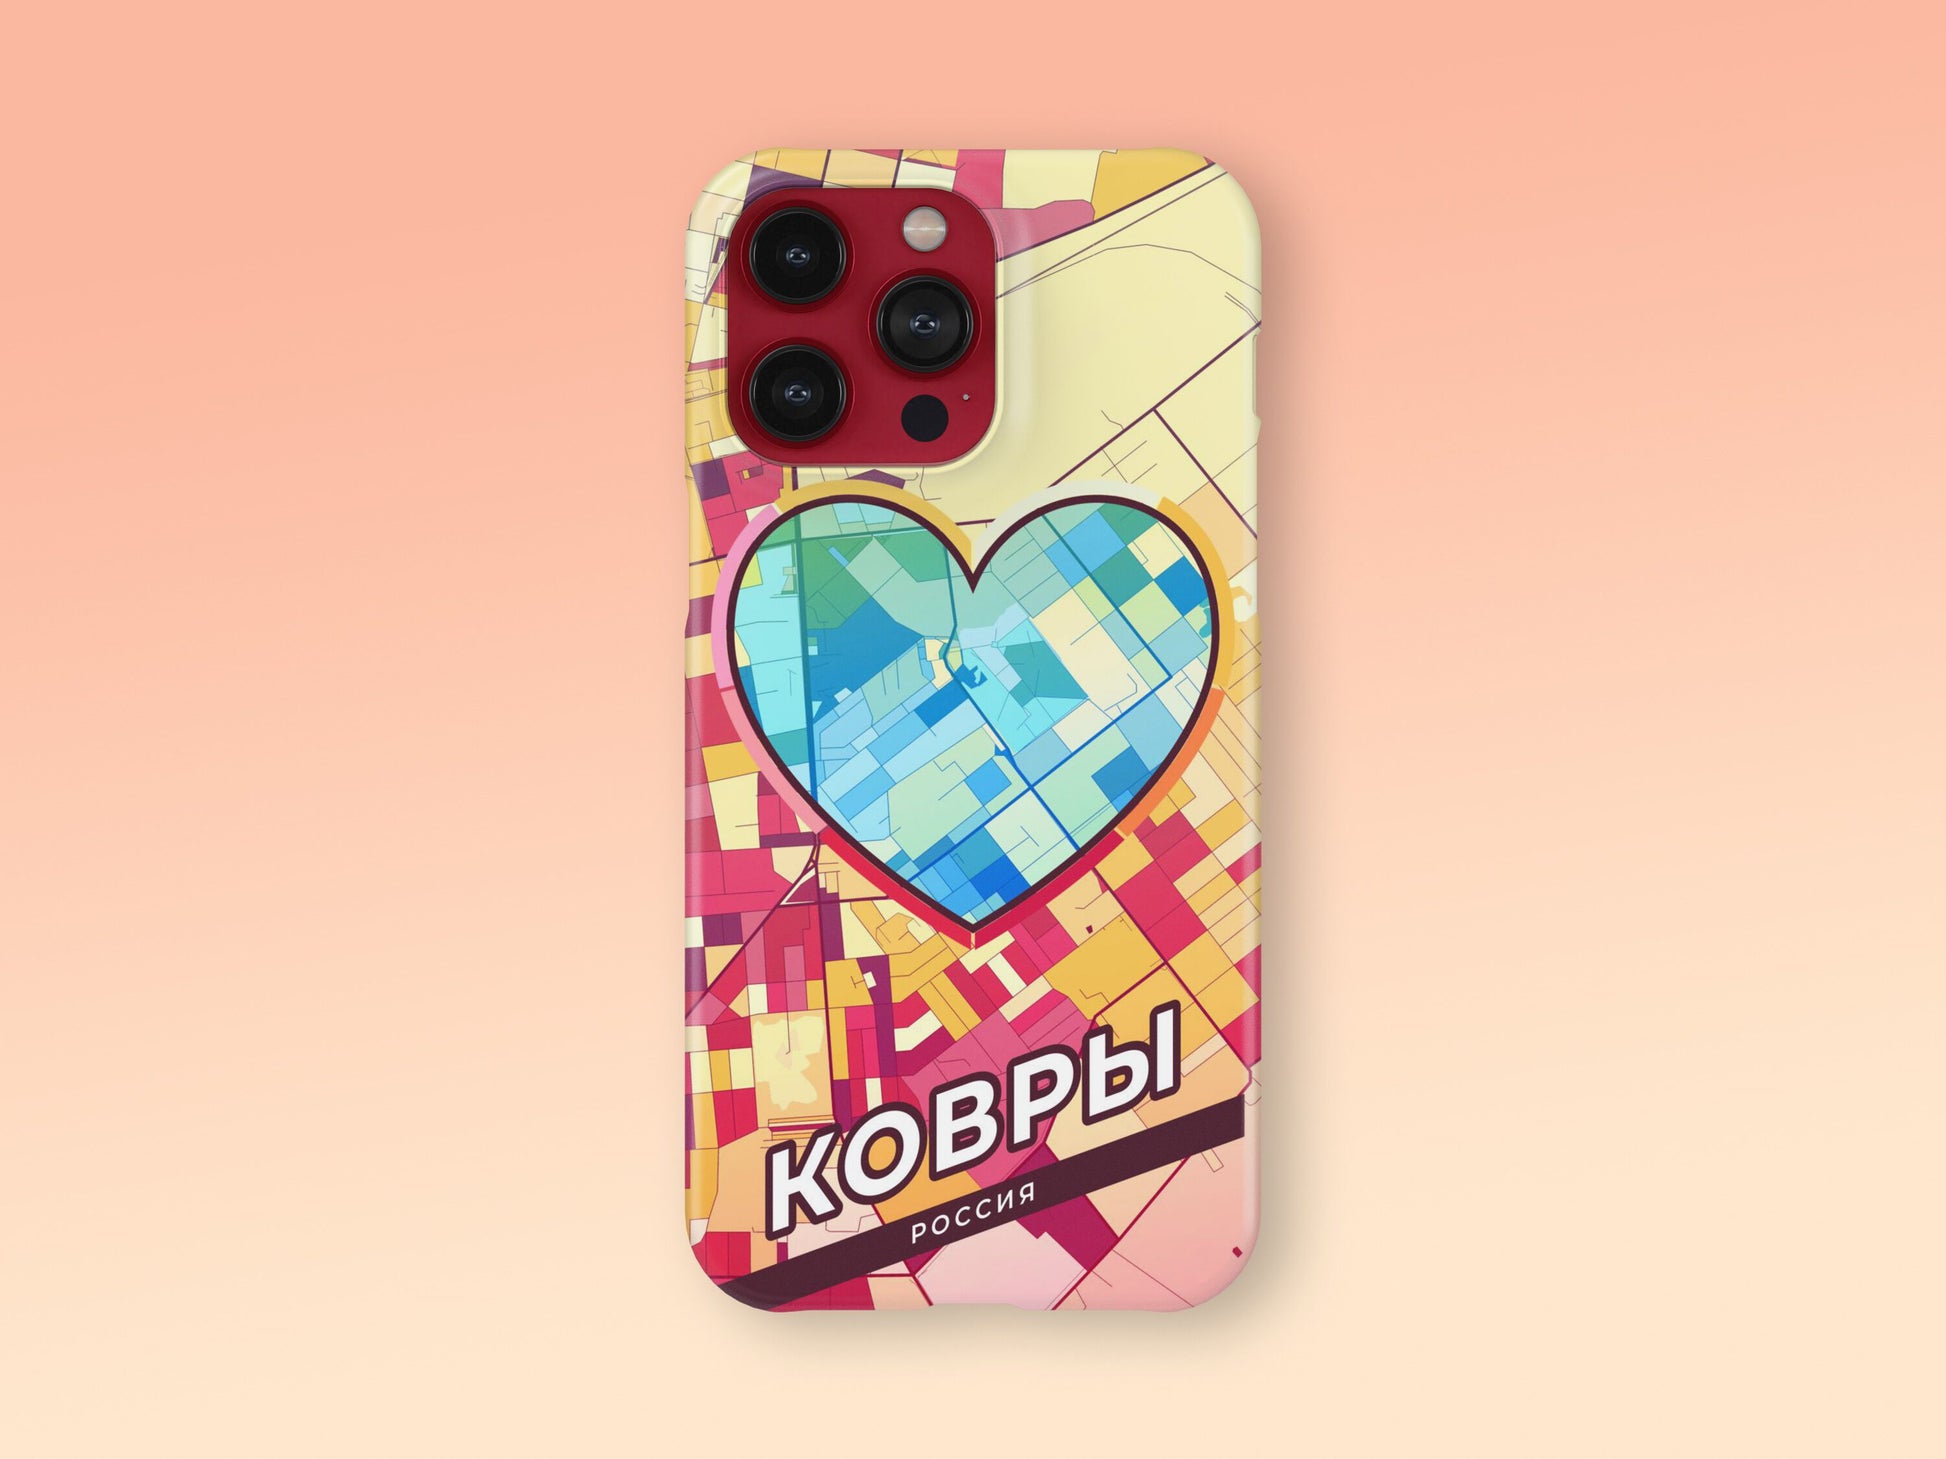 Kovrov Russia slim phone case with colorful icon. Birthday, wedding or housewarming gift. Couple match cases. 2